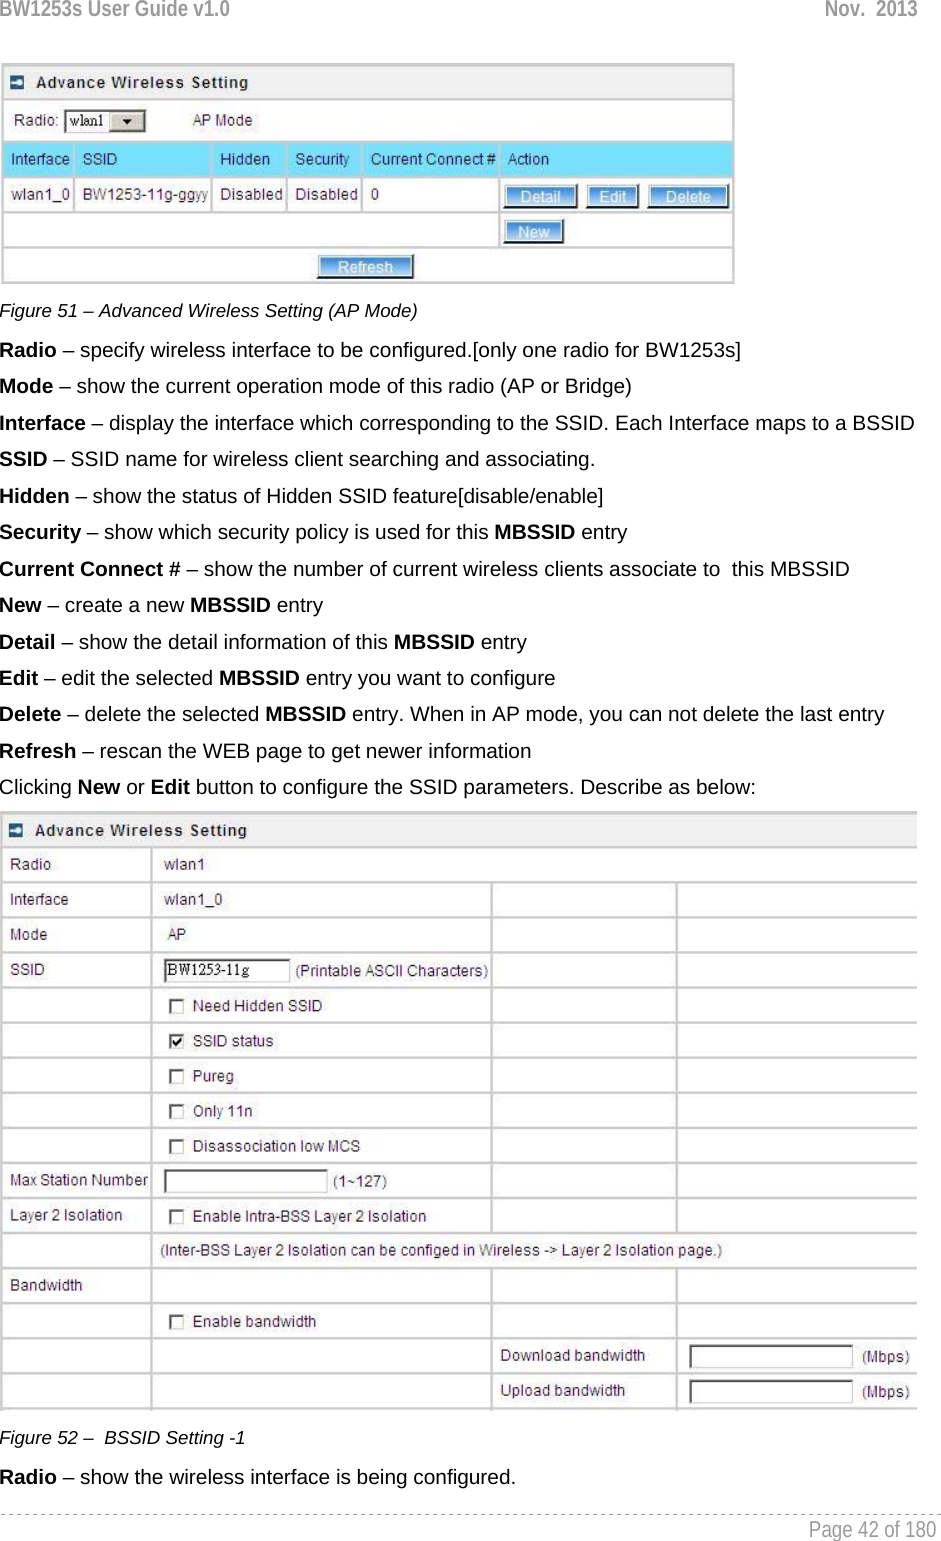 BW1253s User Guide v1.0  Nov.  2013     Page 42 of 180    Figure 51 – Advanced Wireless Setting (AP Mode) Radio – specify wireless interface to be configured.[only one radio for BW1253s] Mode – show the current operation mode of this radio (AP or Bridge) Interface – display the interface which corresponding to the SSID. Each Interface maps to a BSSID SSID – SSID name for wireless client searching and associating. Hidden – show the status of Hidden SSID feature[disable/enable] Security – show which security policy is used for this MBSSID entry Current Connect # – show the number of current wireless clients associate to  this MBSSID New – create a new MBSSID entry Detail – show the detail information of this MBSSID entry Edit – edit the selected MBSSID entry you want to configure Delete – delete the selected MBSSID entry. When in AP mode, you can not delete the last entry Refresh – rescan the WEB page to get newer information Clicking New or Edit button to configure the SSID parameters. Describe as below:   Figure 52 –  BSSID Setting -1 Radio – show the wireless interface is being configured. 